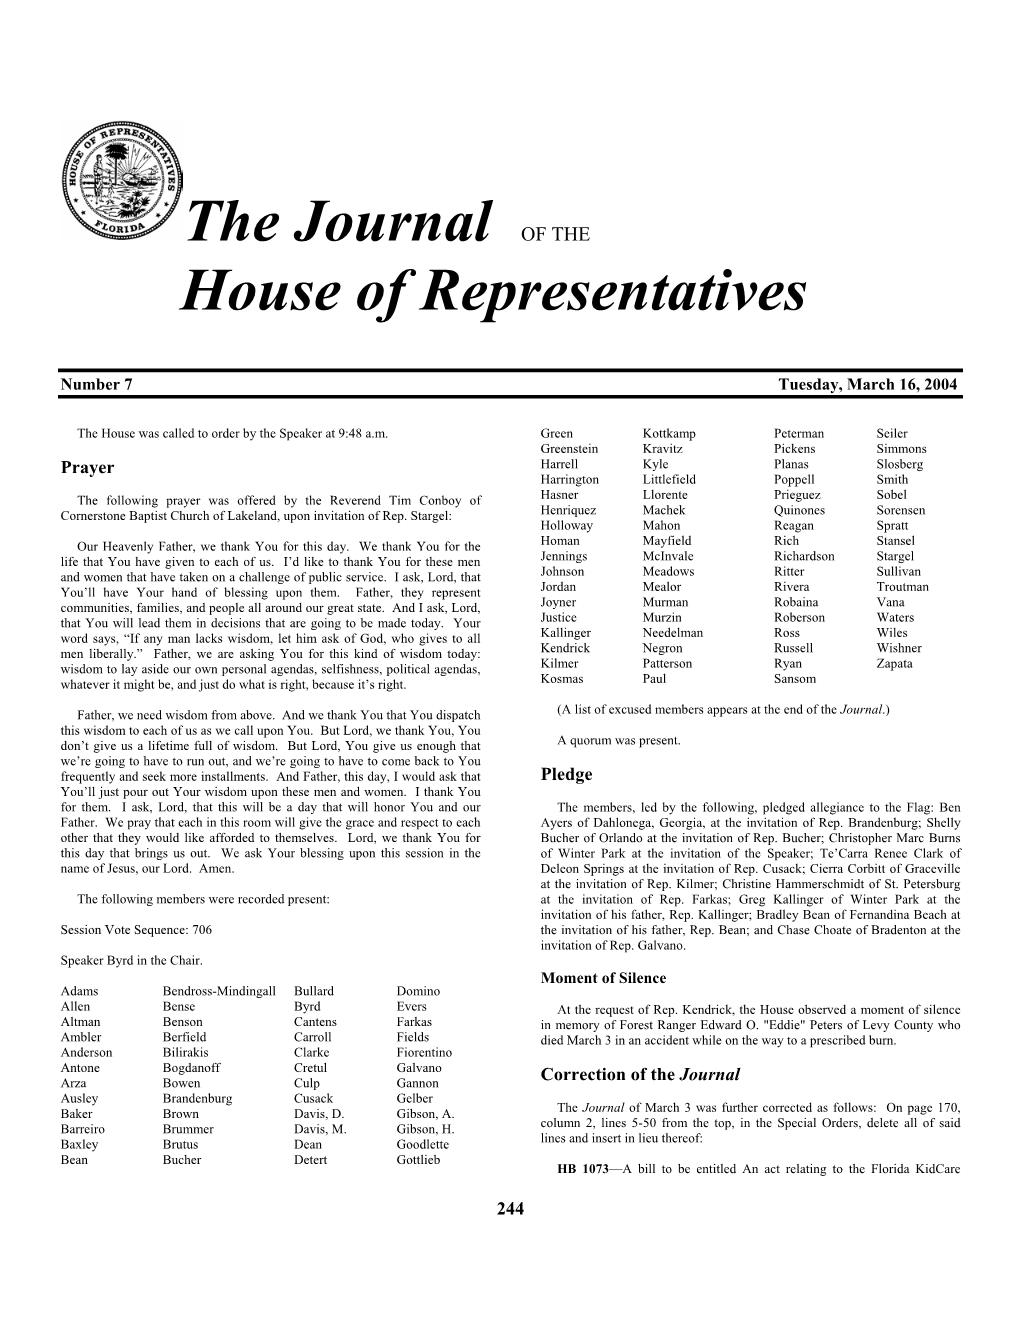 The Journal of the House of Representatives